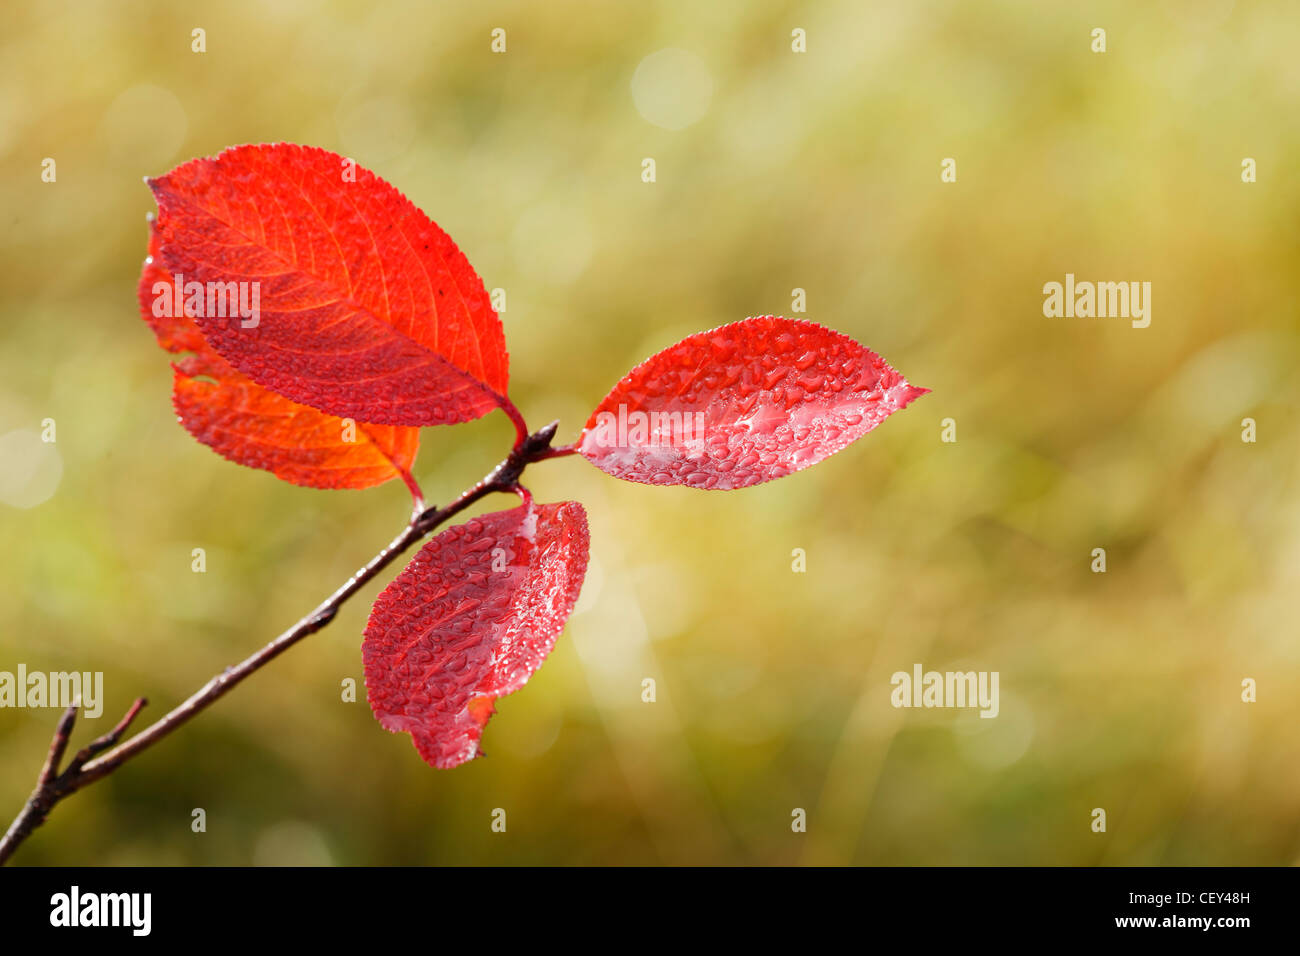 Red autumn leafs of aronia tree, fall colors of nature Stock Photo